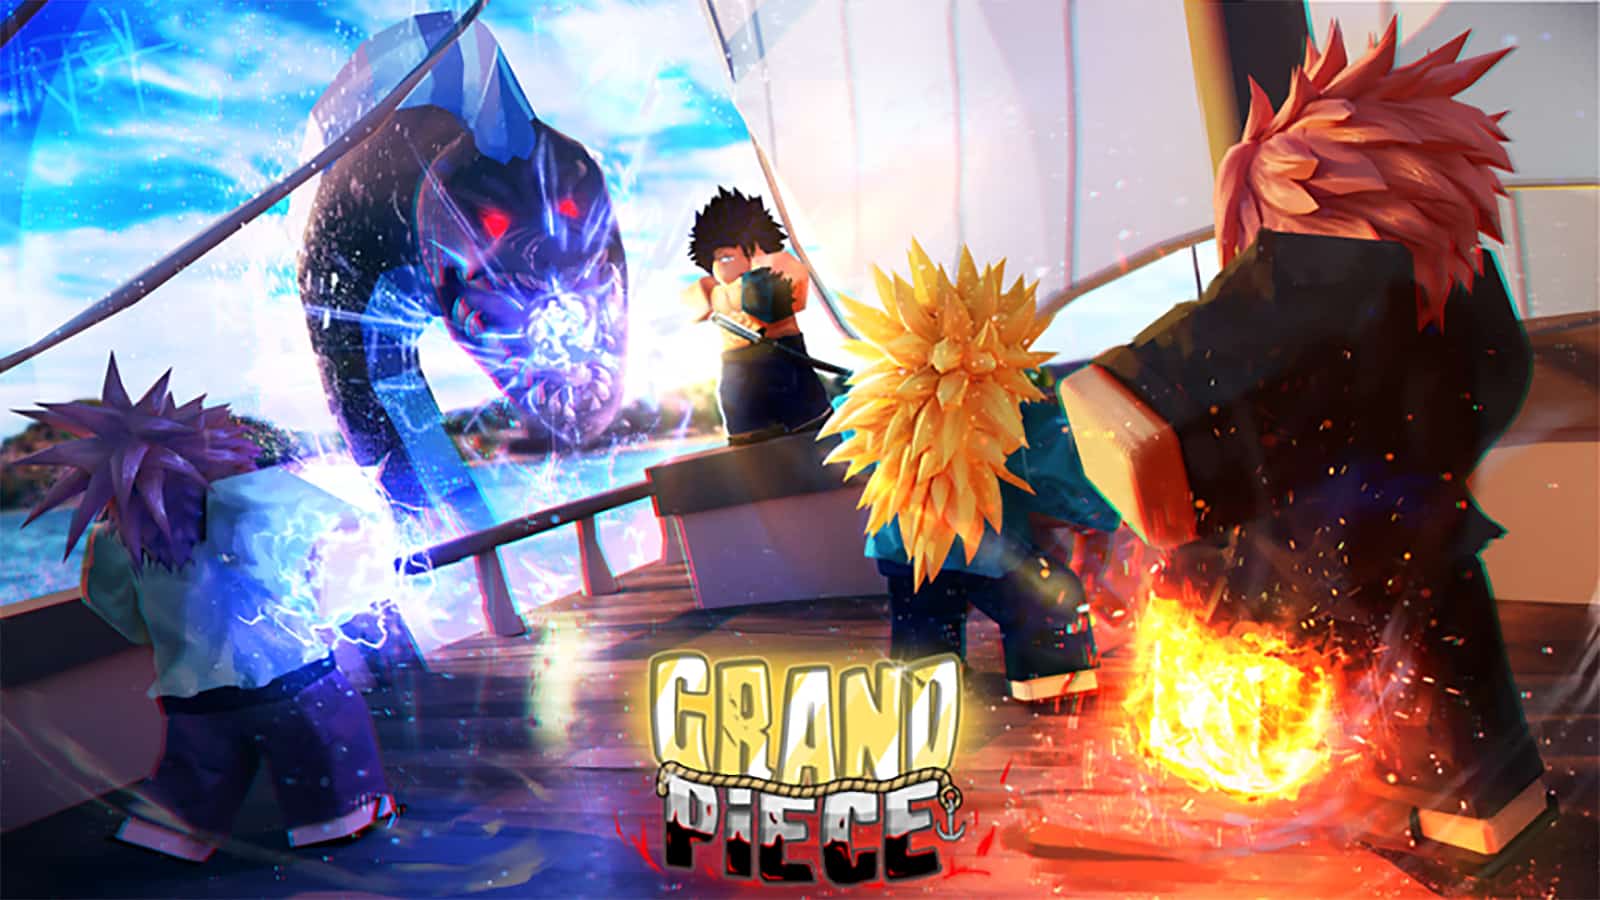 Artwork from Grand Piece Online in Roblox